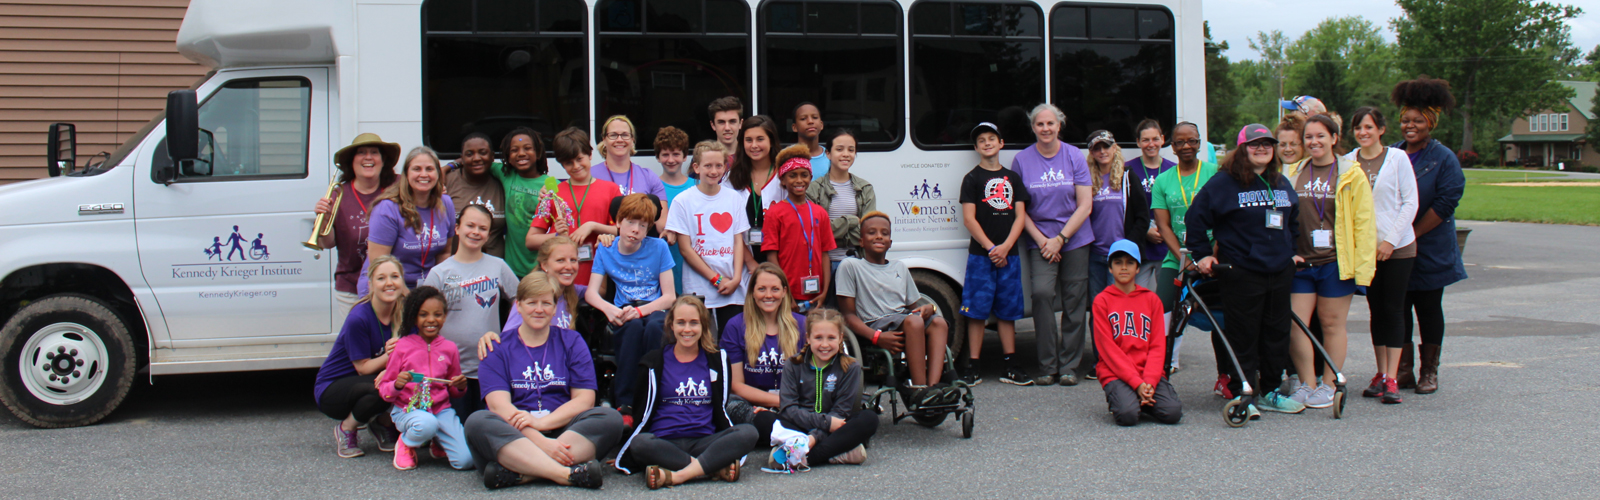 Camp SOAR campers with WIN bus